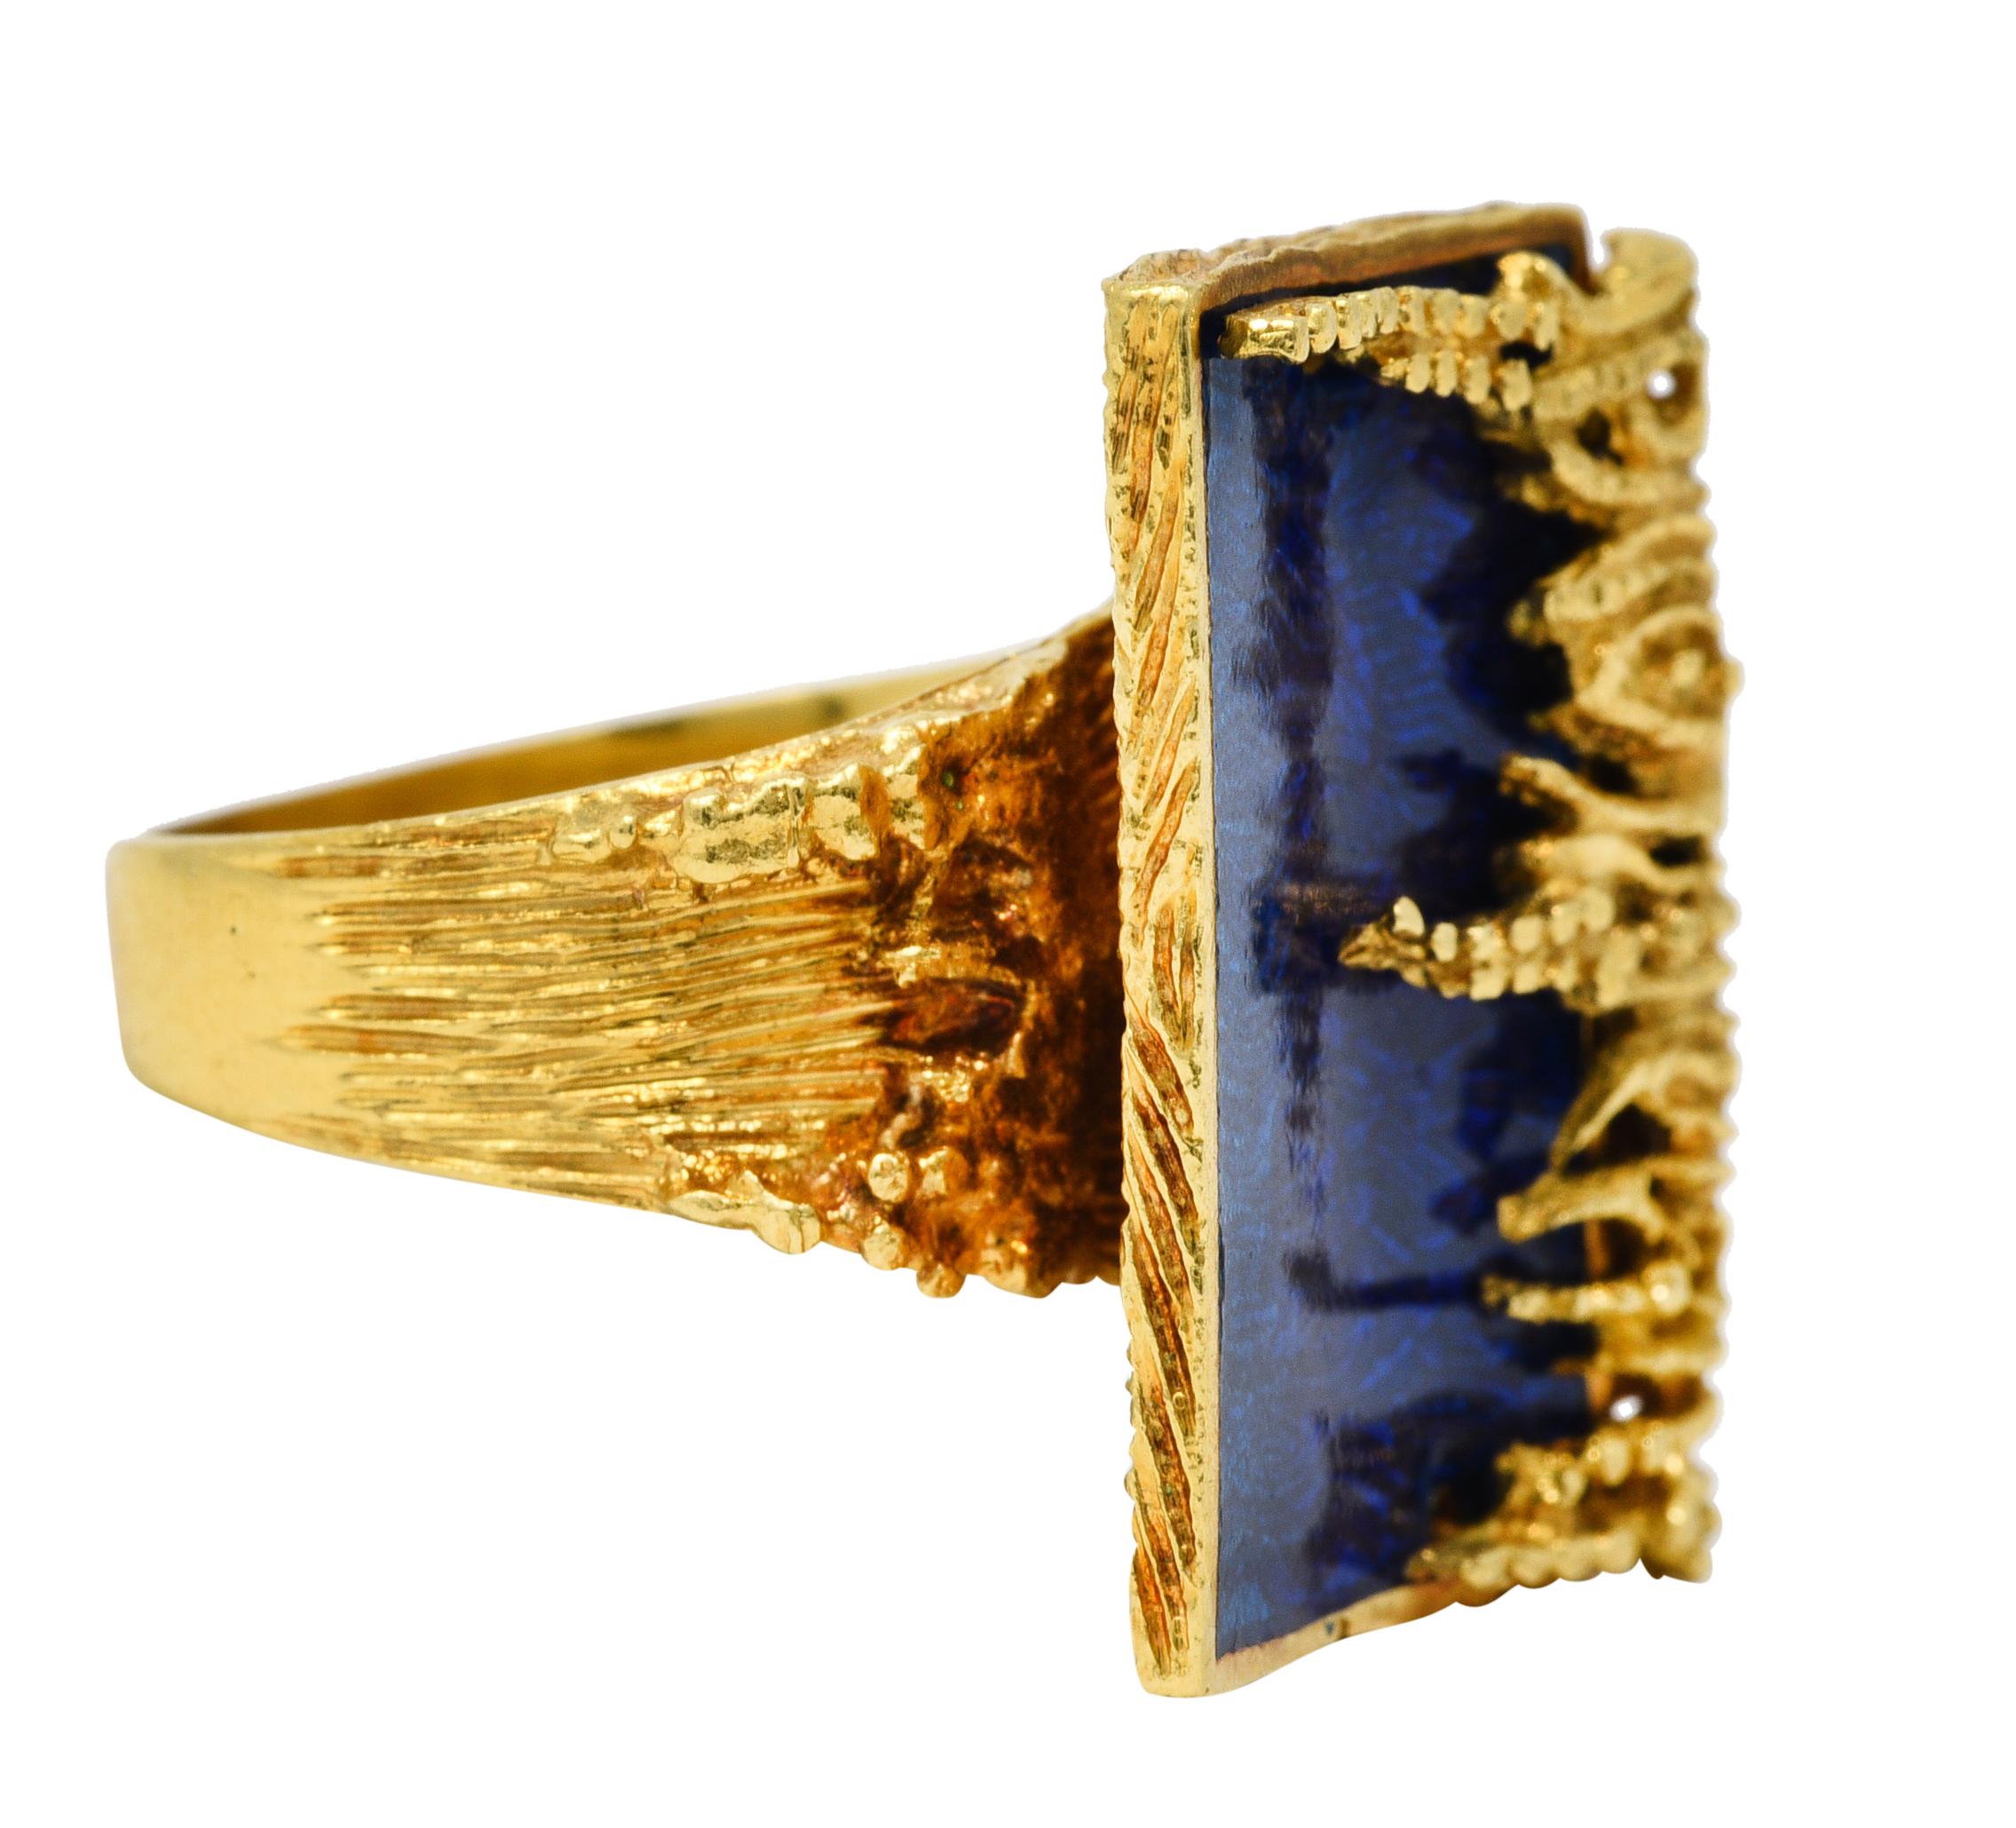 Designed as a rectangular form encompassed by texturous vine-like gold

Glossed with guilloche enamel - ombre teal to royal blue with a deeply grooved motif

Completed by a wide and deeply grooved shank with a waved form serving as a connection